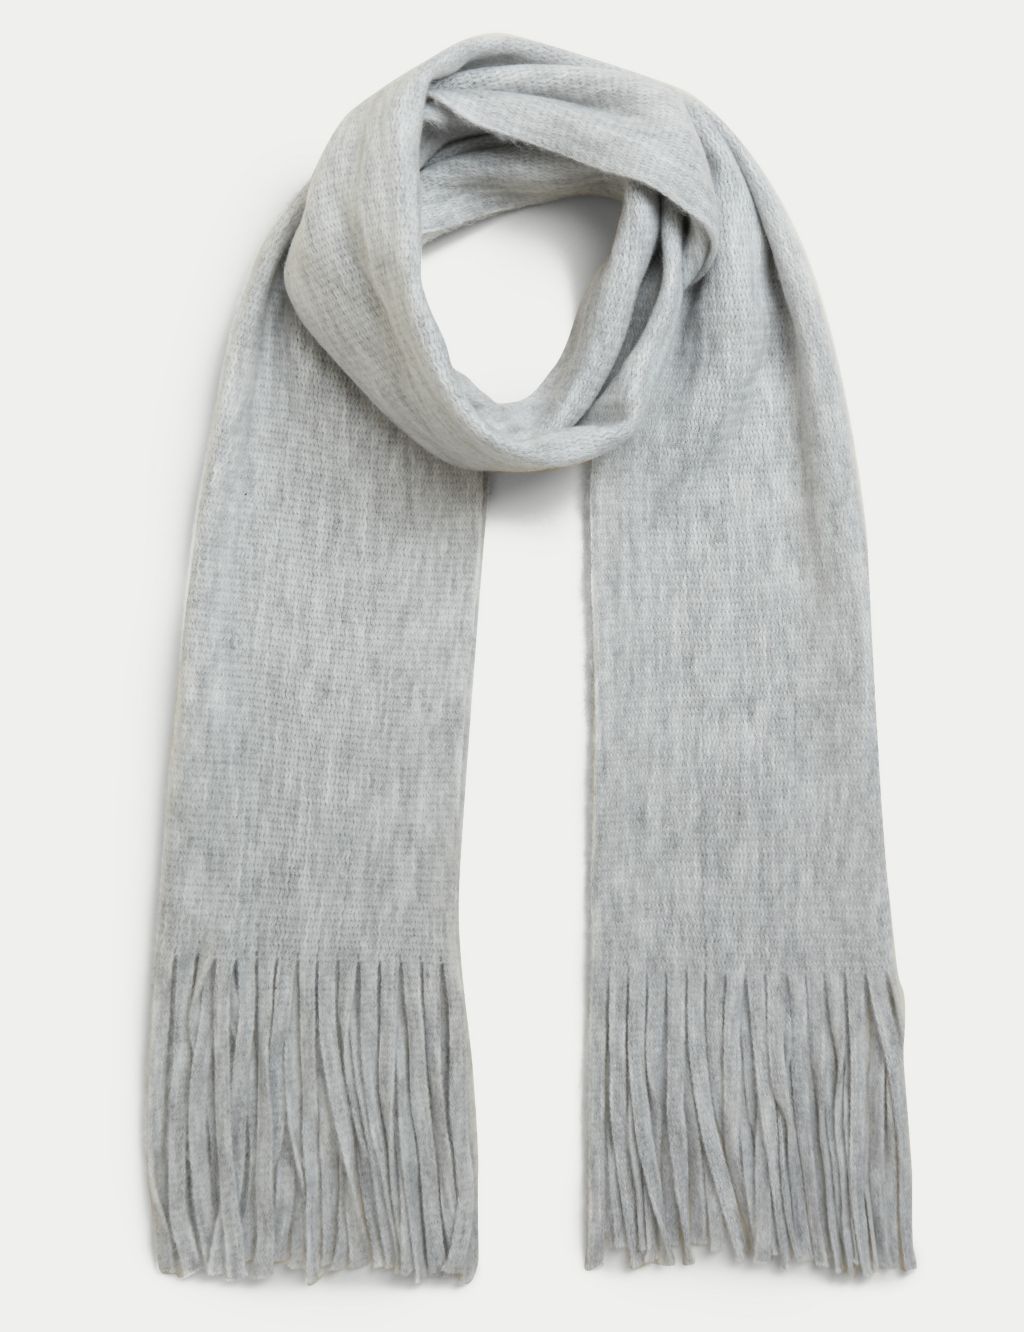 Knitted Tassel Scarf image 1